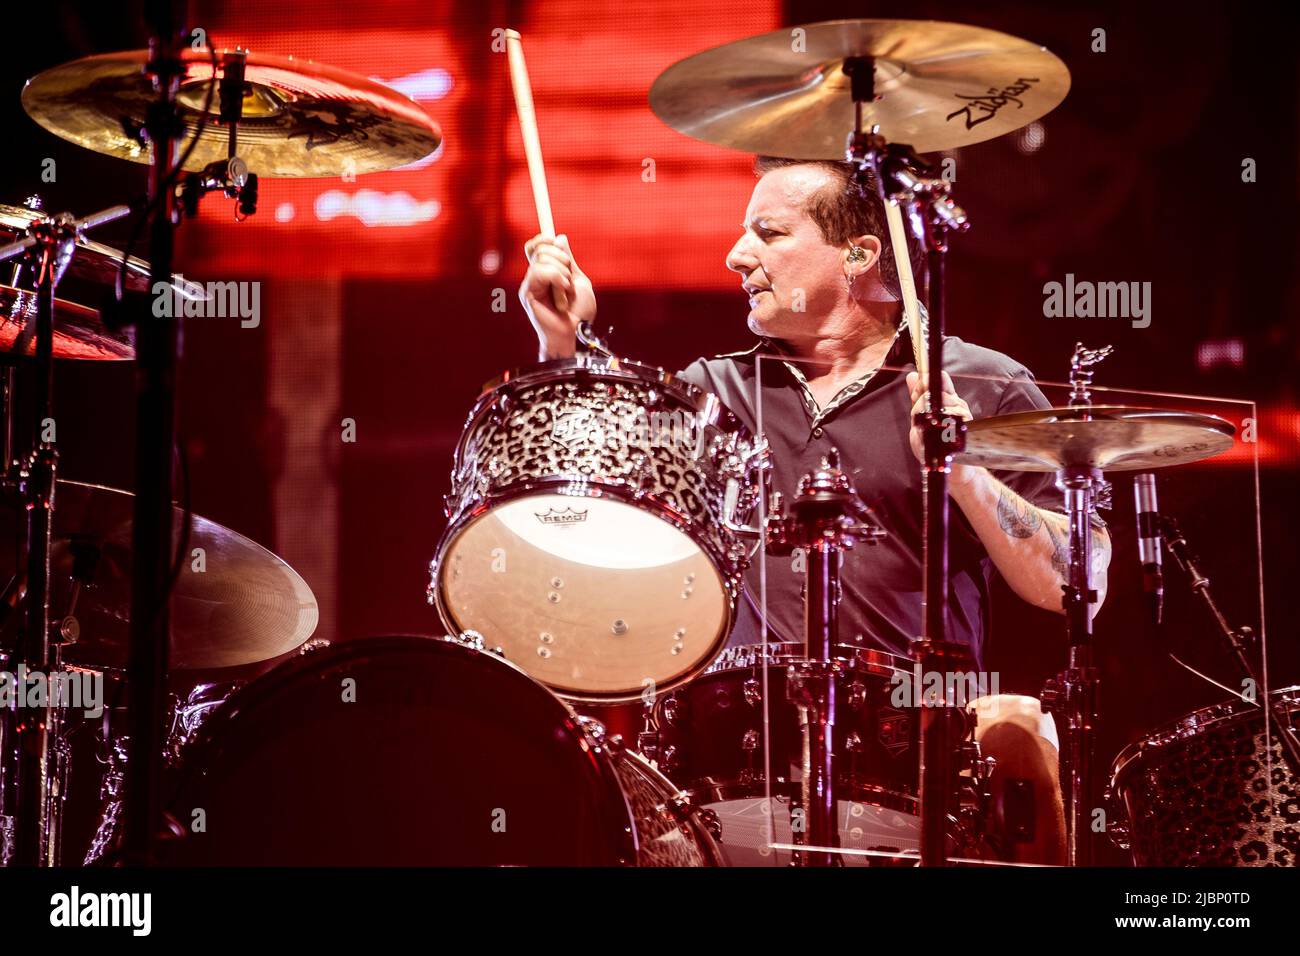 Copenhagen, Denmark. 07th June, 2022. The American rock band Green Day performs a live concert at Forum at Frederiksberg, Copenhagen. Here drummer Tre Cool is seen live on stage. (Photo Credit: Gonzales Photo/Alamy Live News Stock Photo